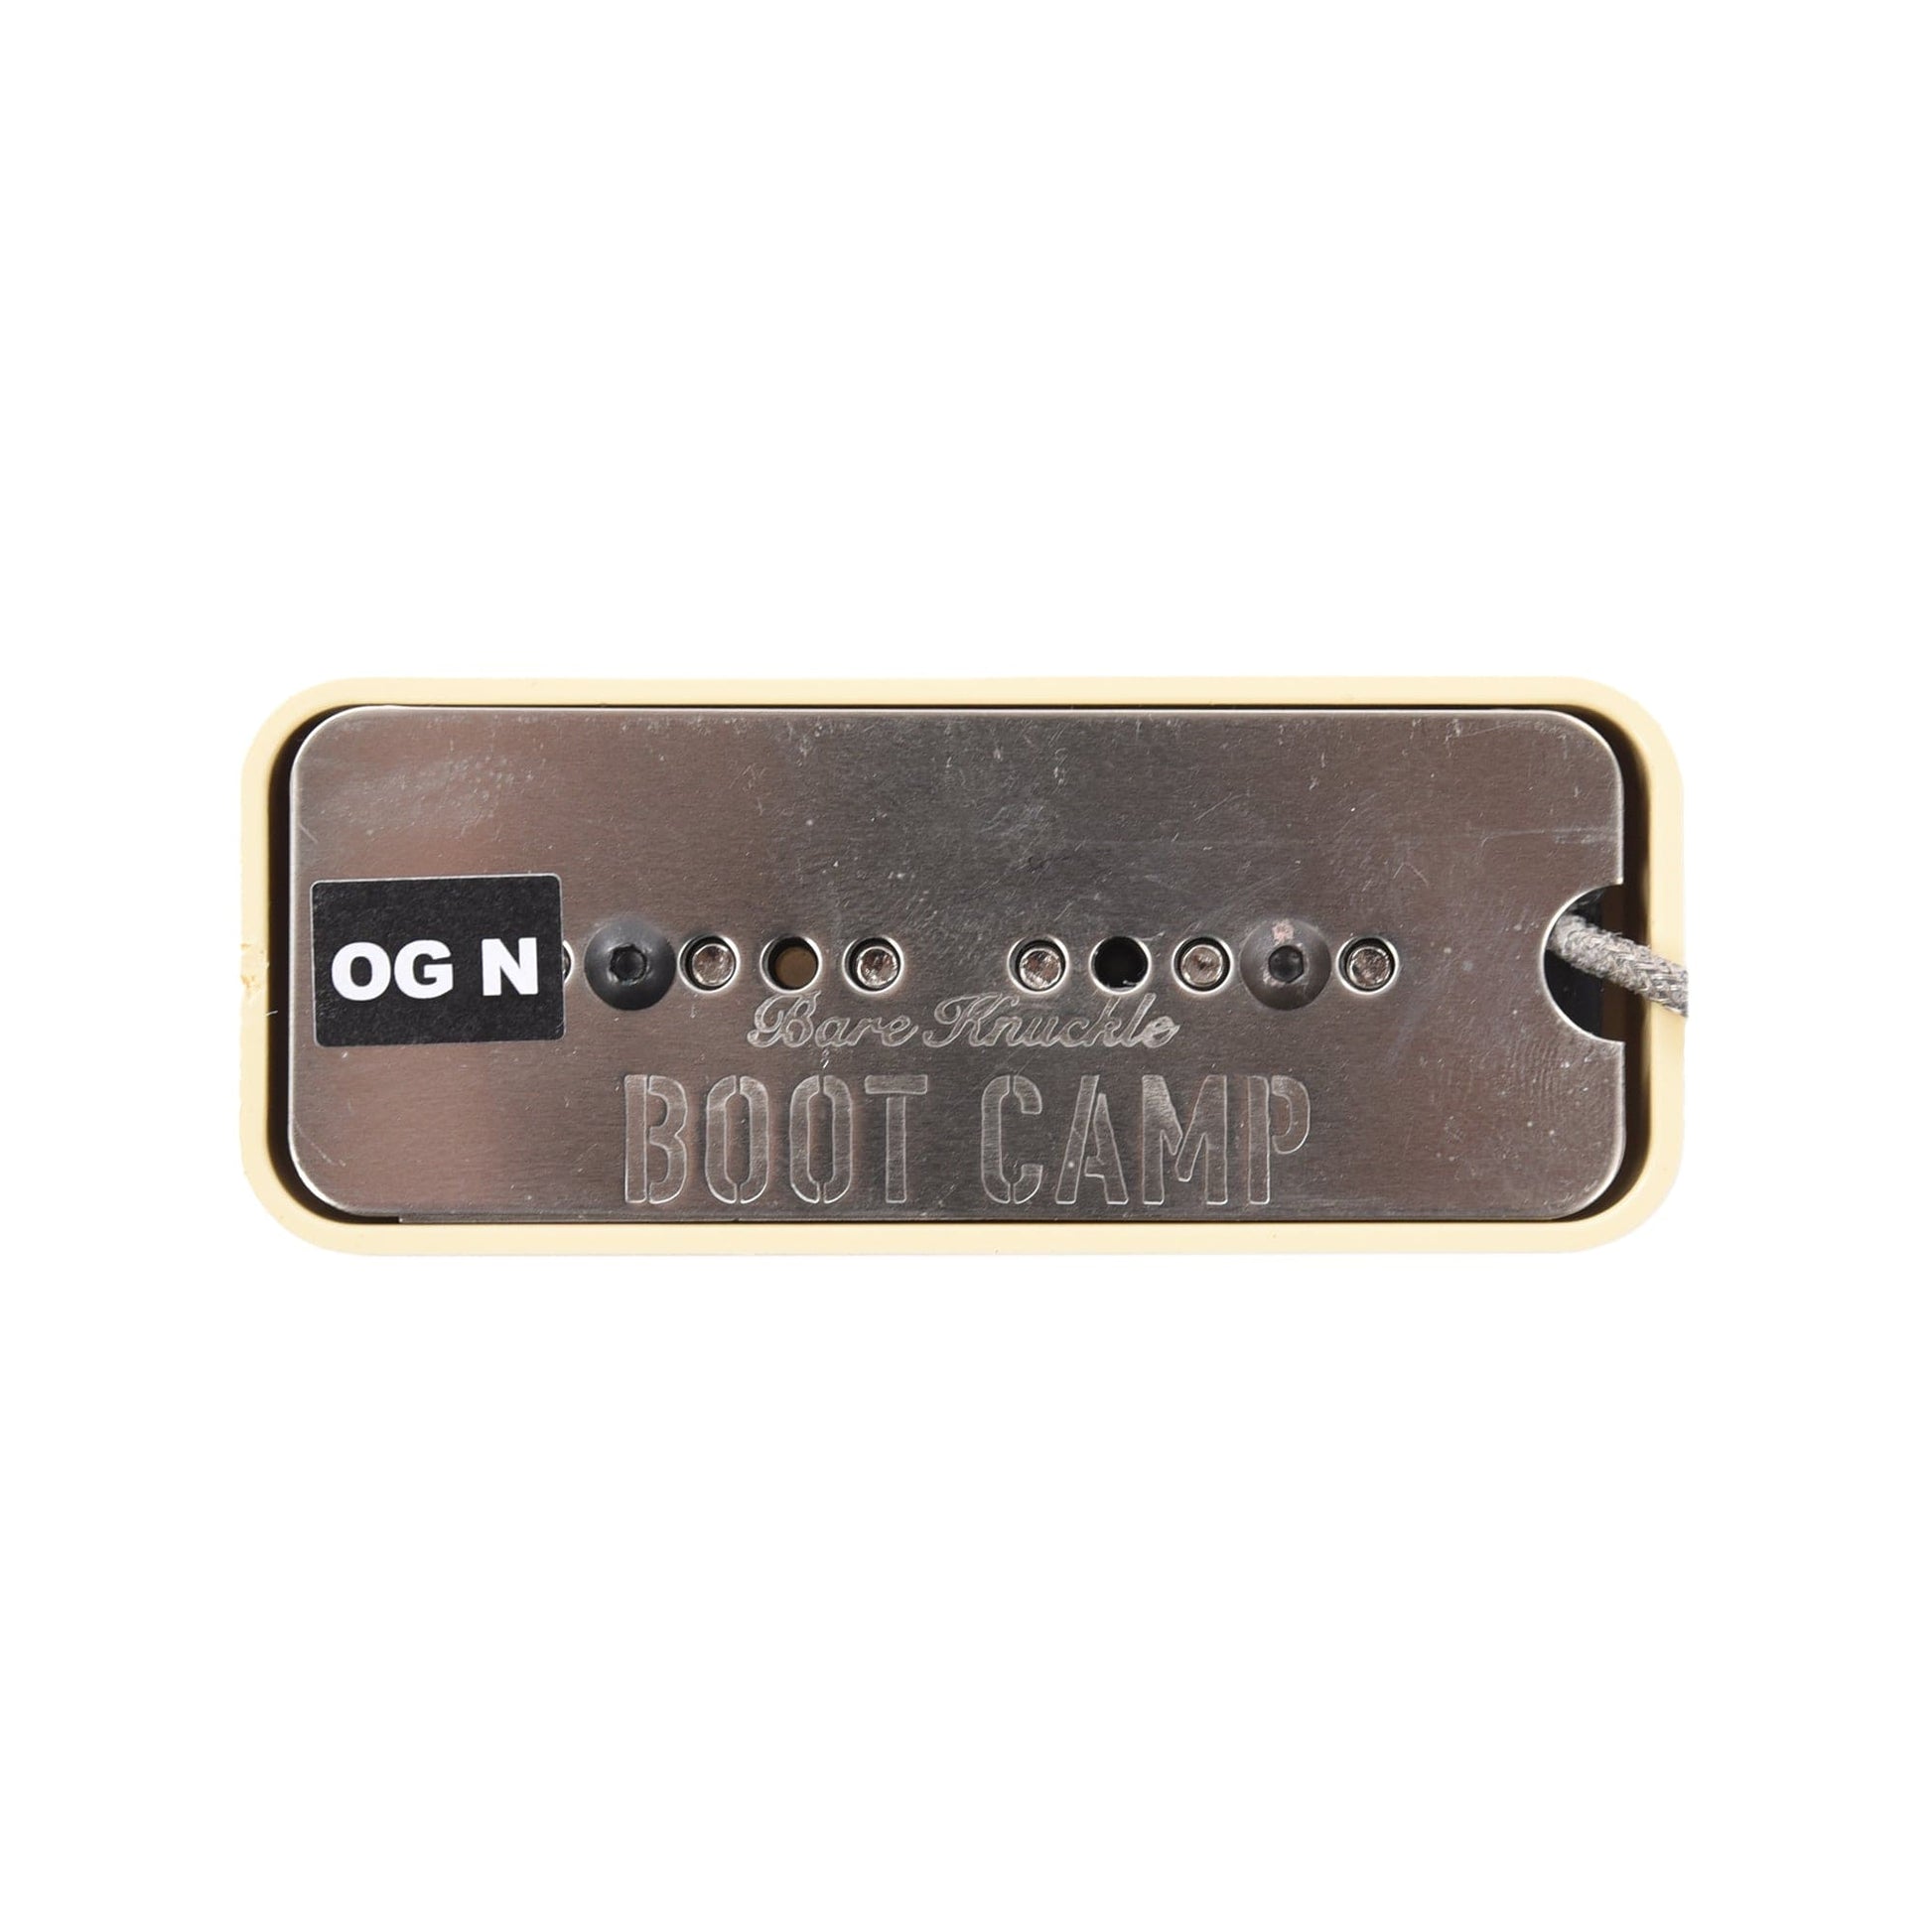 Bare Knuckle Boot Camp P90 Old Guard Neck Pickup Cream Parts / Guitar Pickups